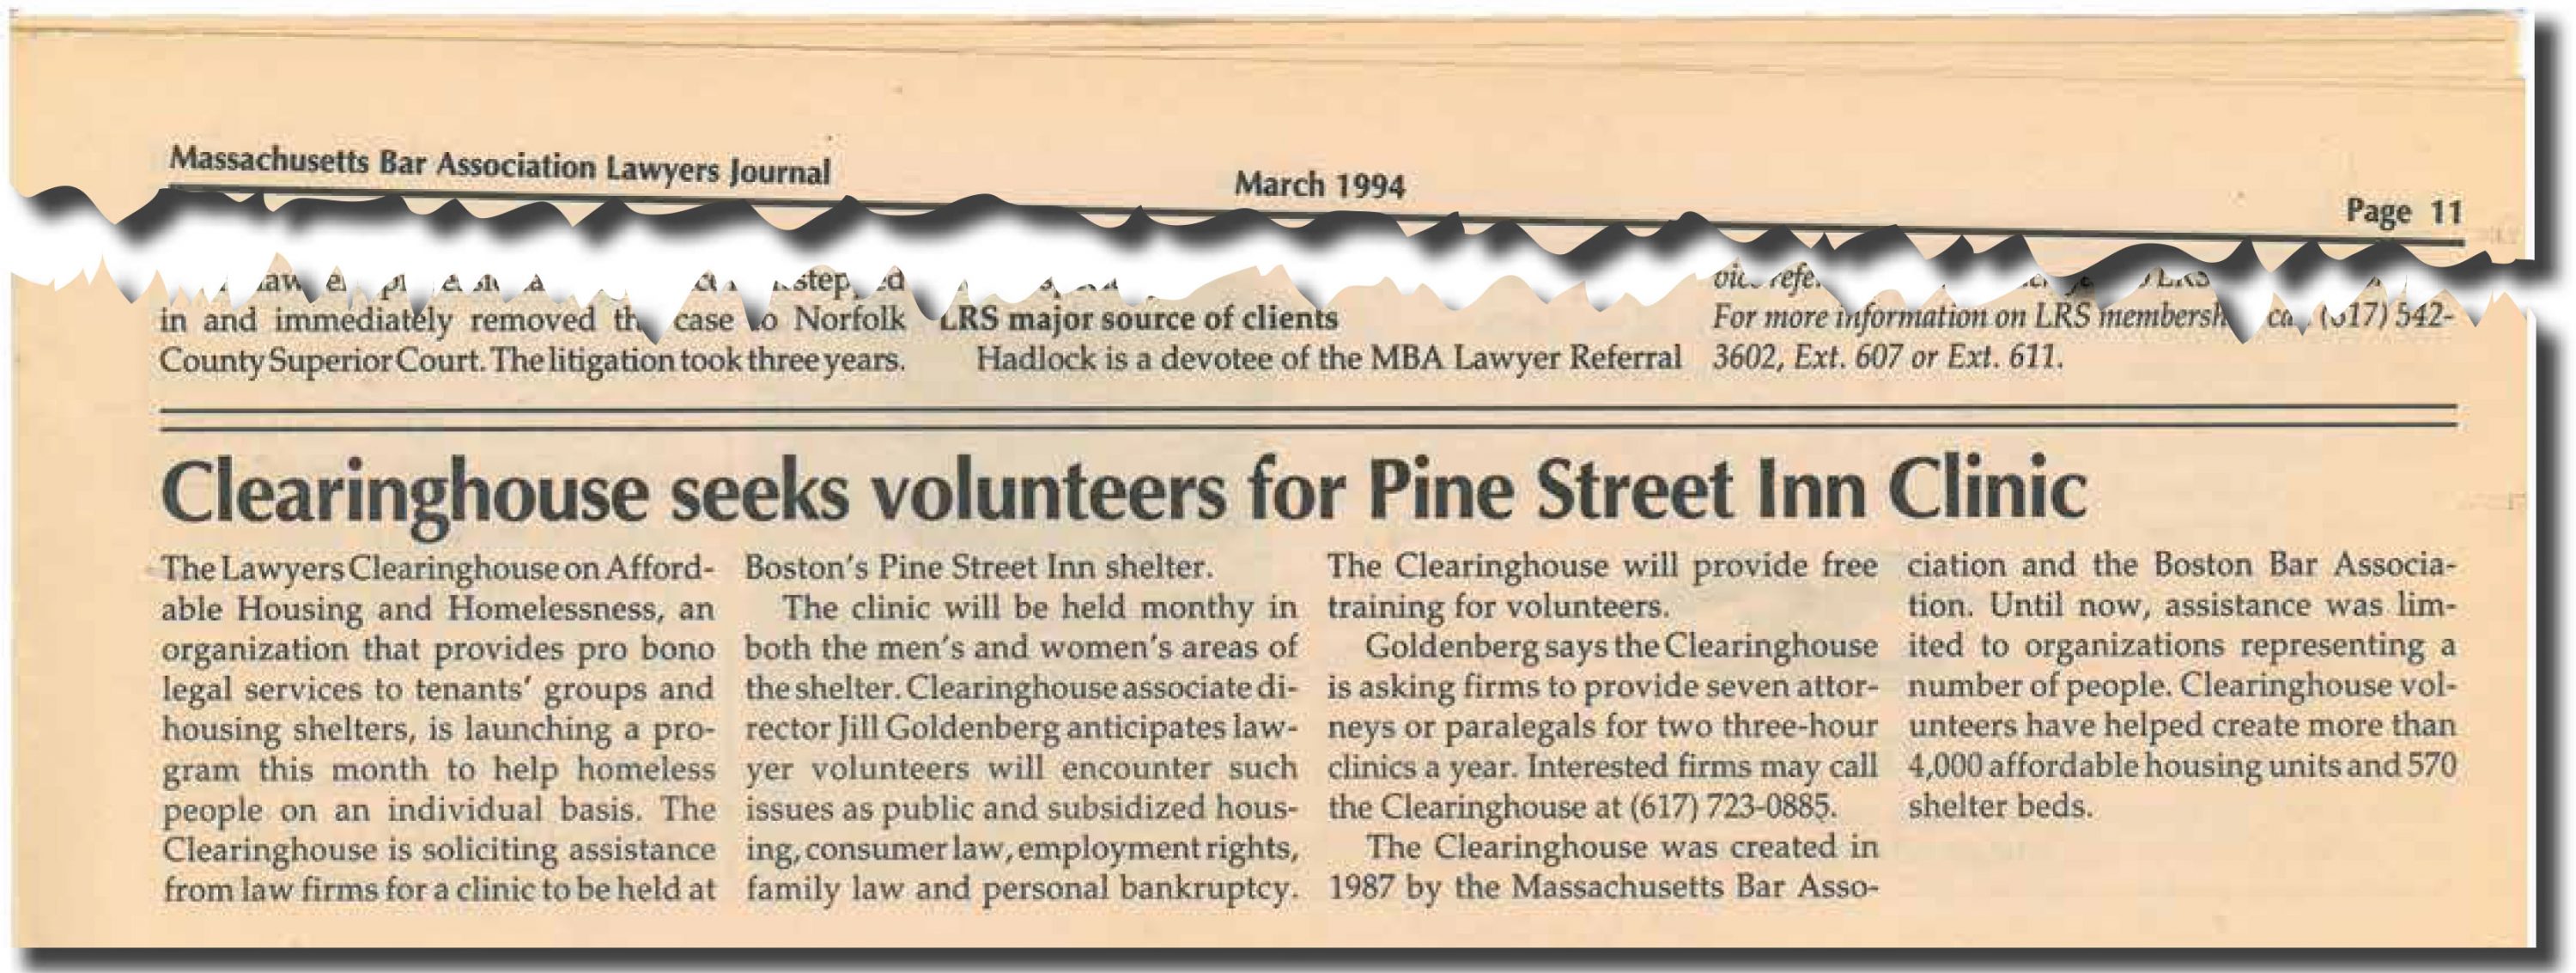 In 1994, the Lawyers Clearinghouse added a new program to bring direct legal services to homeless individuals.